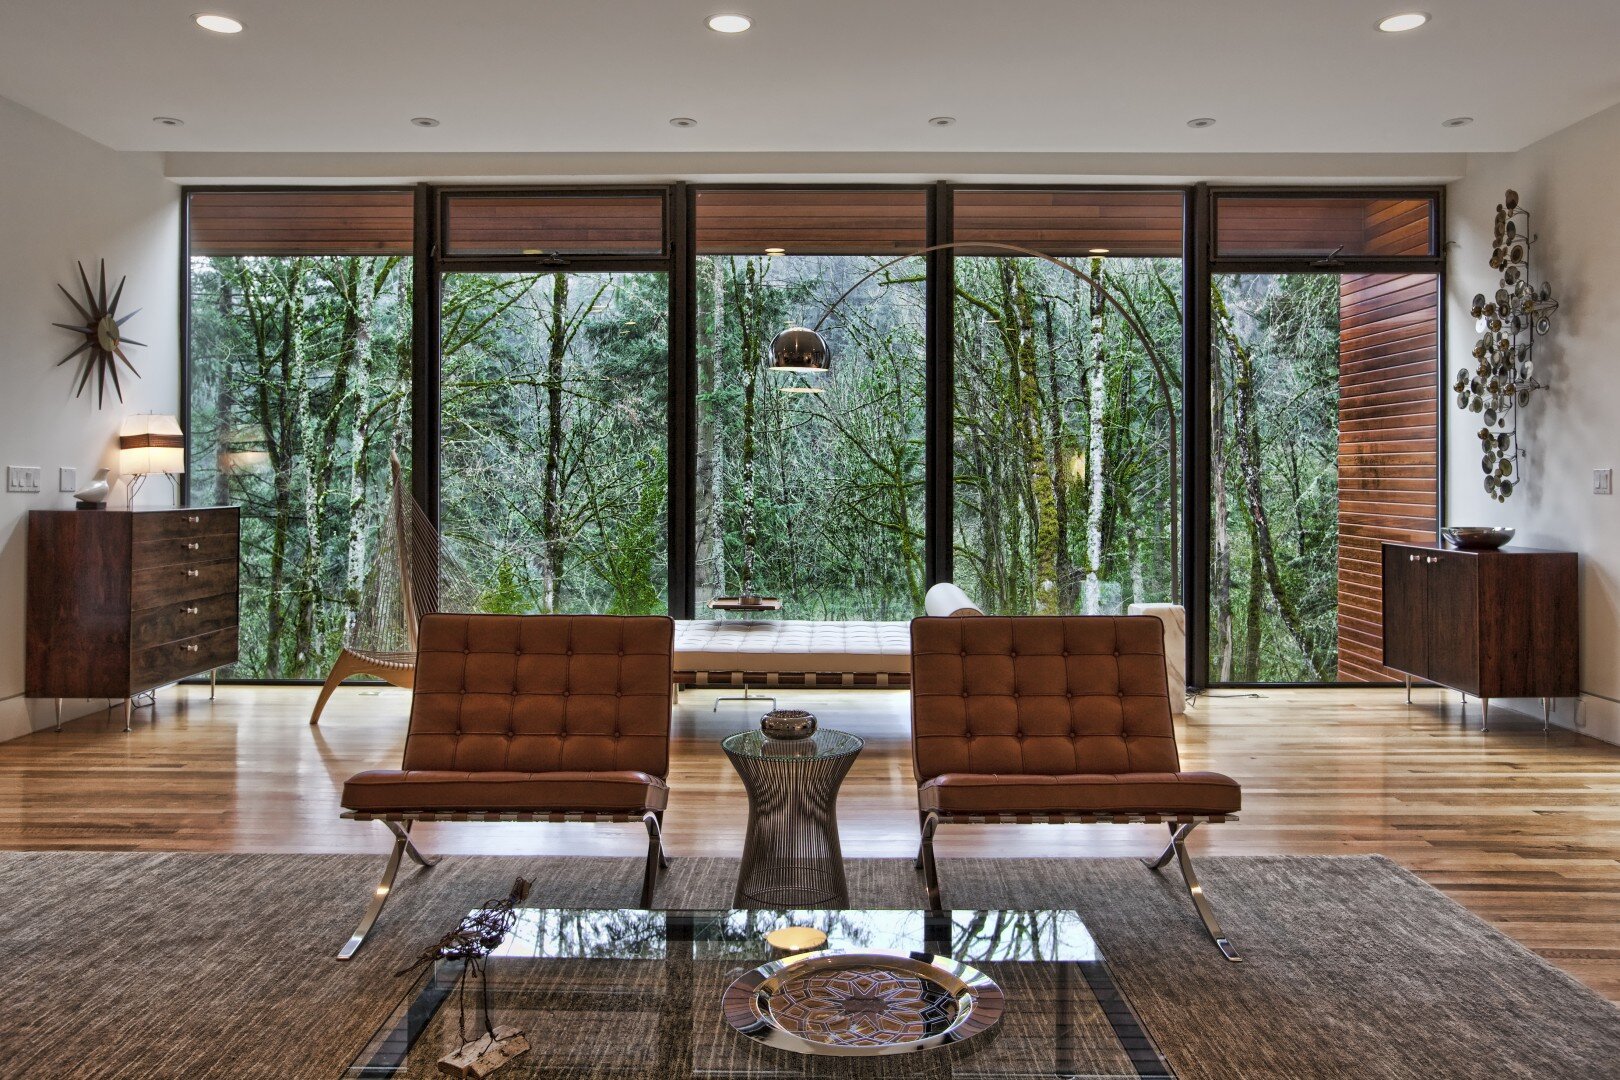 Hoke residence - house in the forest